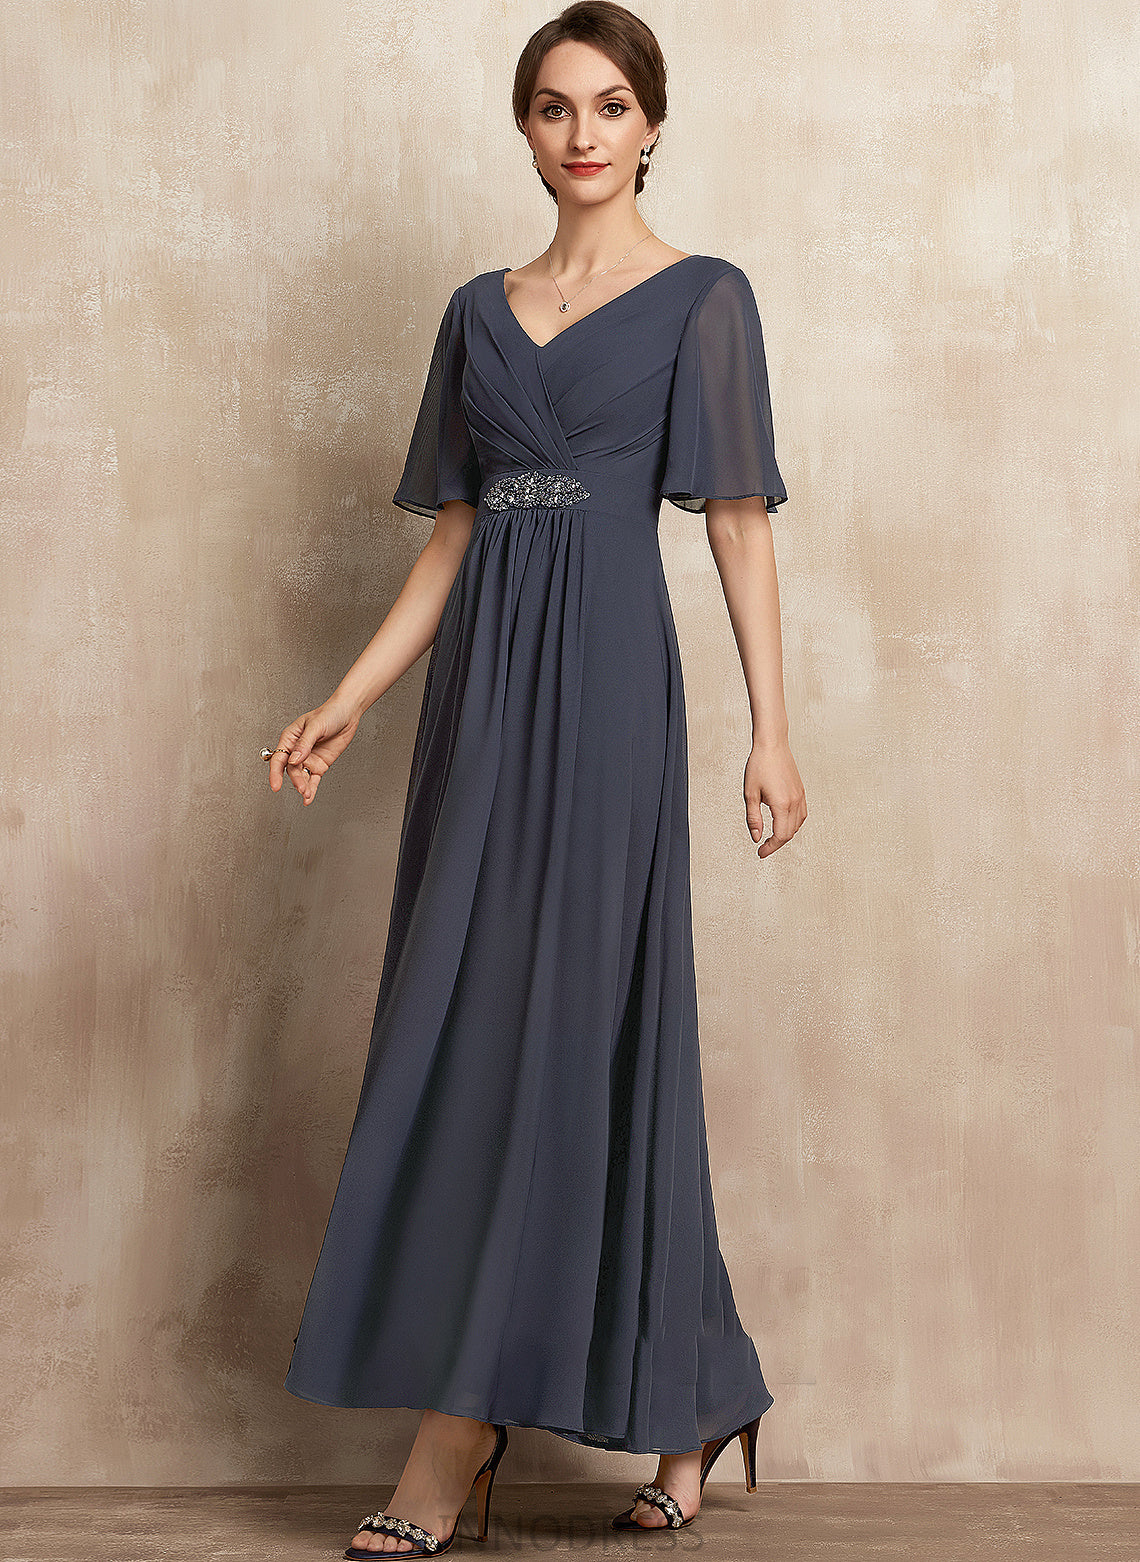 Sequins Beading Bride of Chiffon With Ruffle the A-Line Dress V-neck Mother of the Bride Dresses Ankle-Length Mother Zara